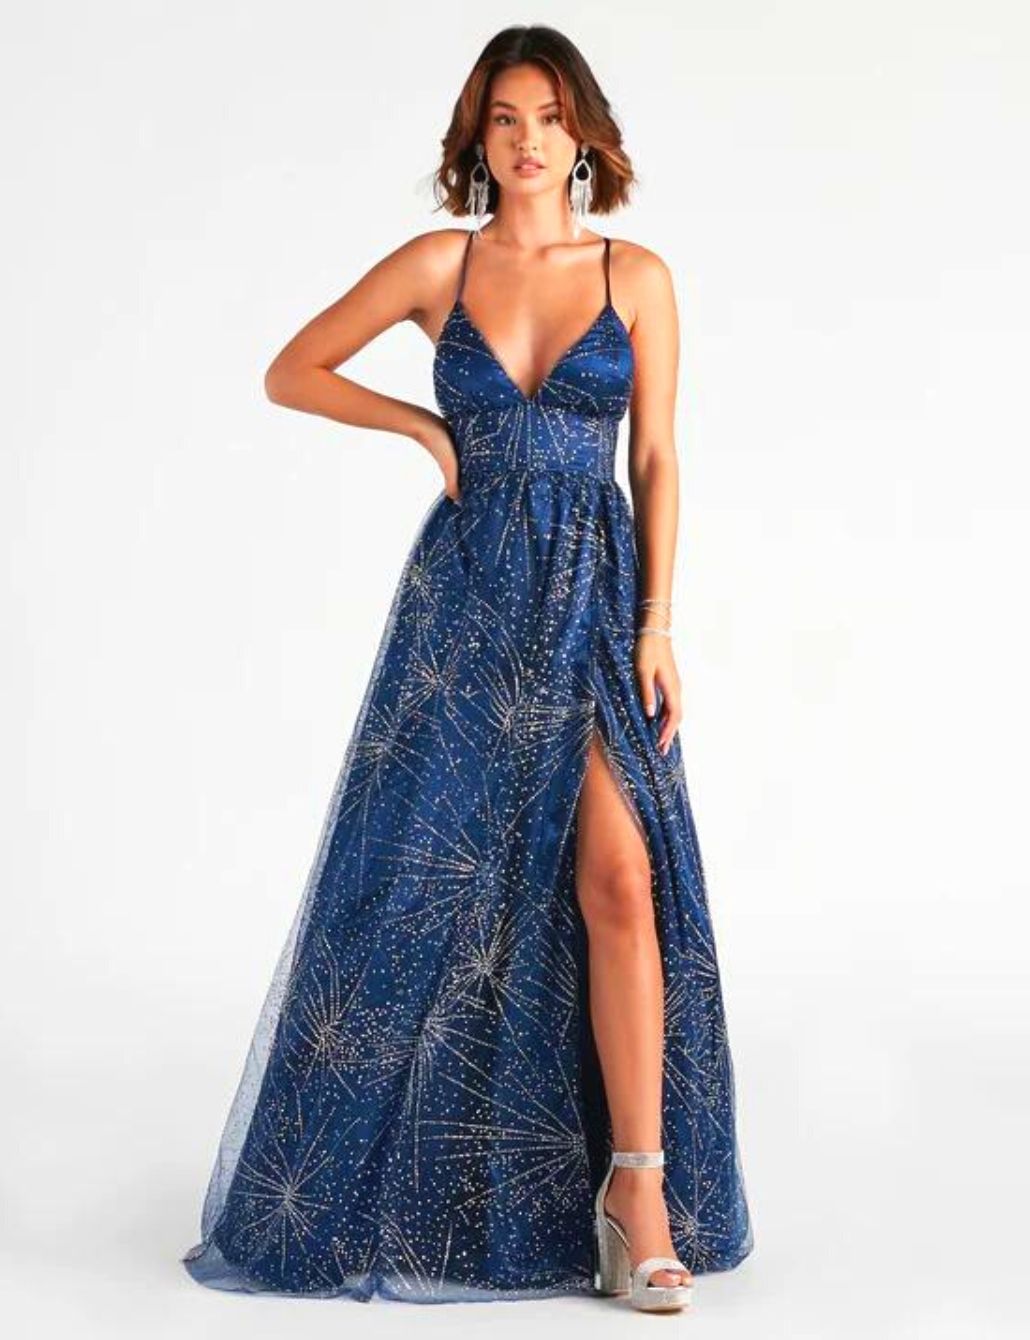 2022 Prom Trends - Free Sewing Patterns